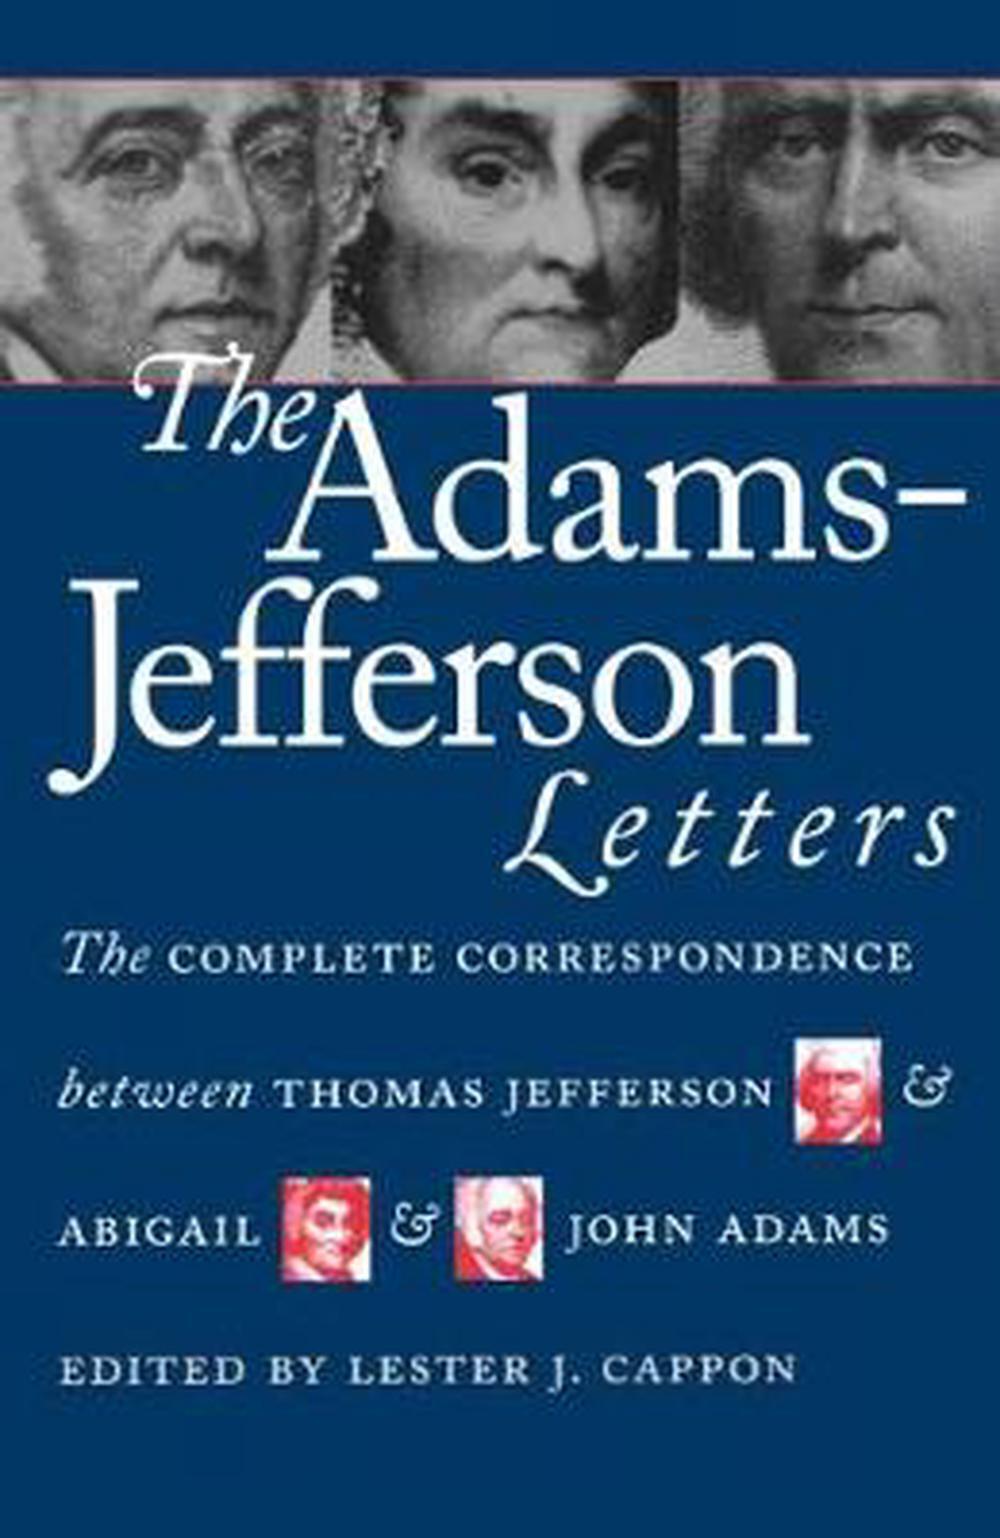 The Adams-Jefferson Letters: The Complete Correspondence Between Thomas Jefferso